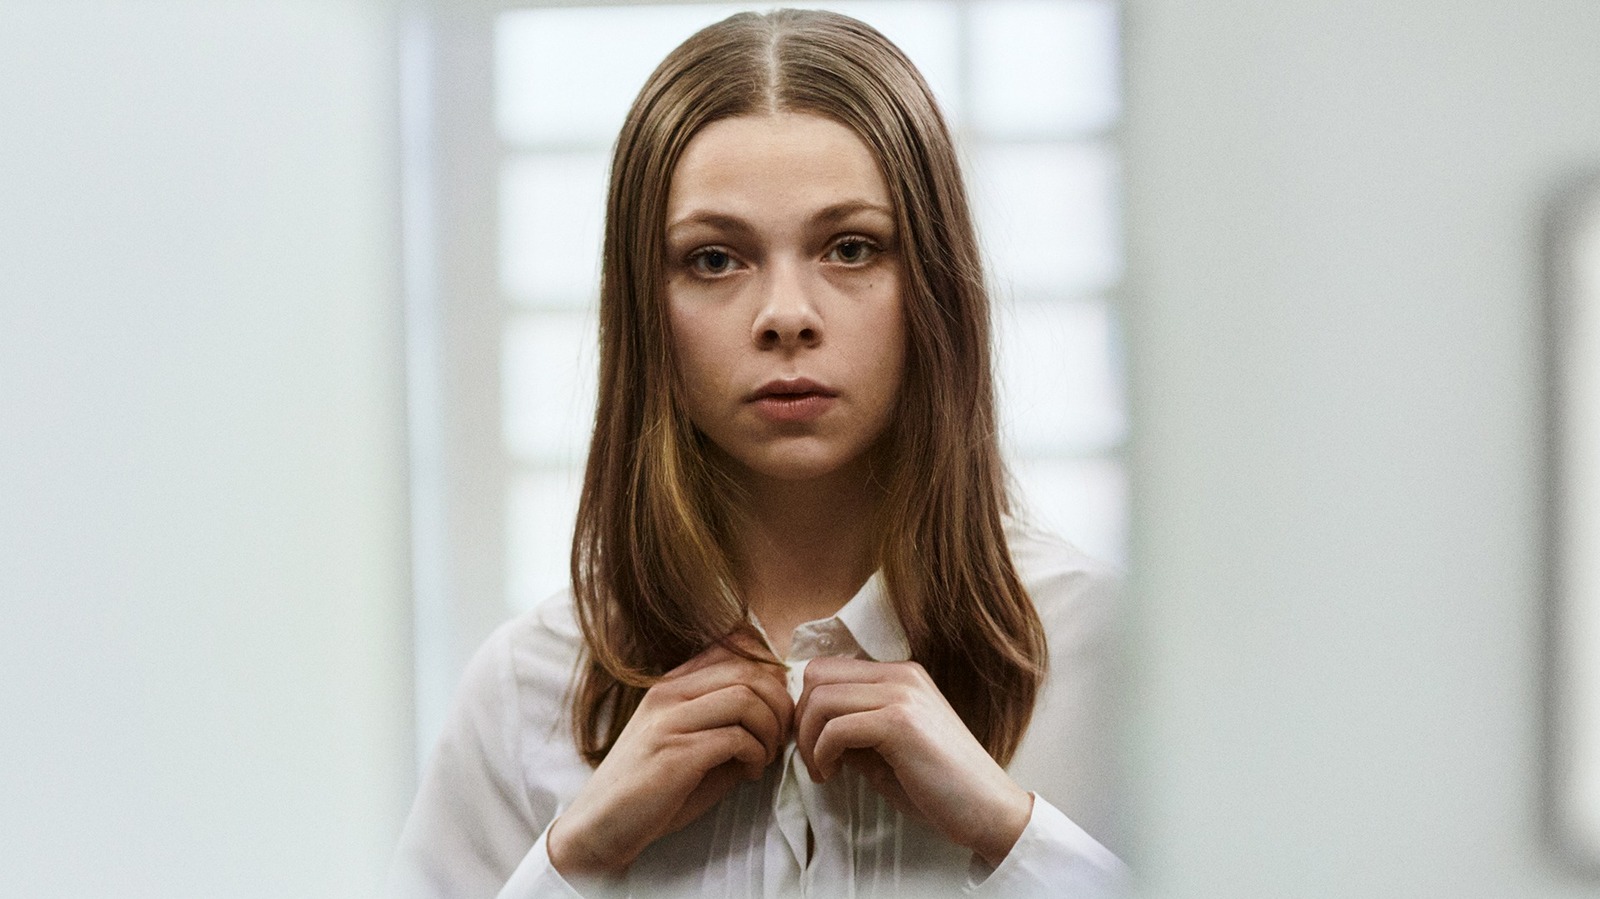 A New Swedish Crime Series Quickly Claims A Top Spot On Netflix Charts